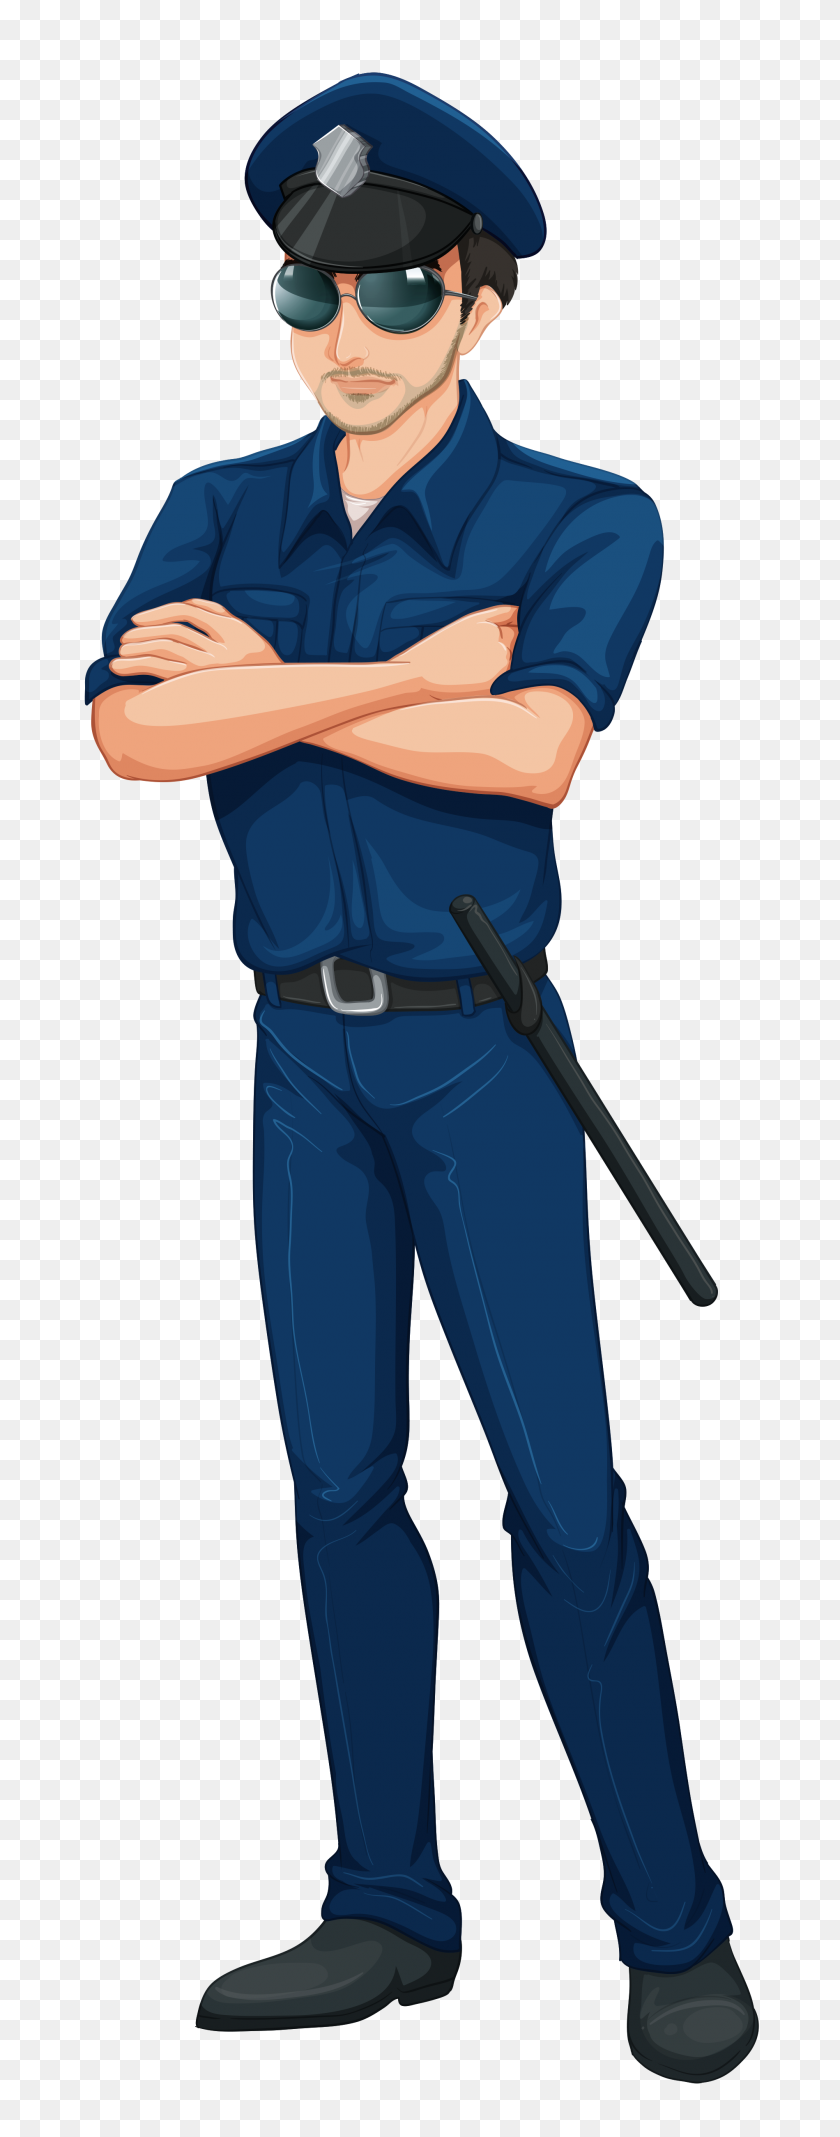 1899x5059 Police Hd Png Transparent Police Hd Images - Police PNG